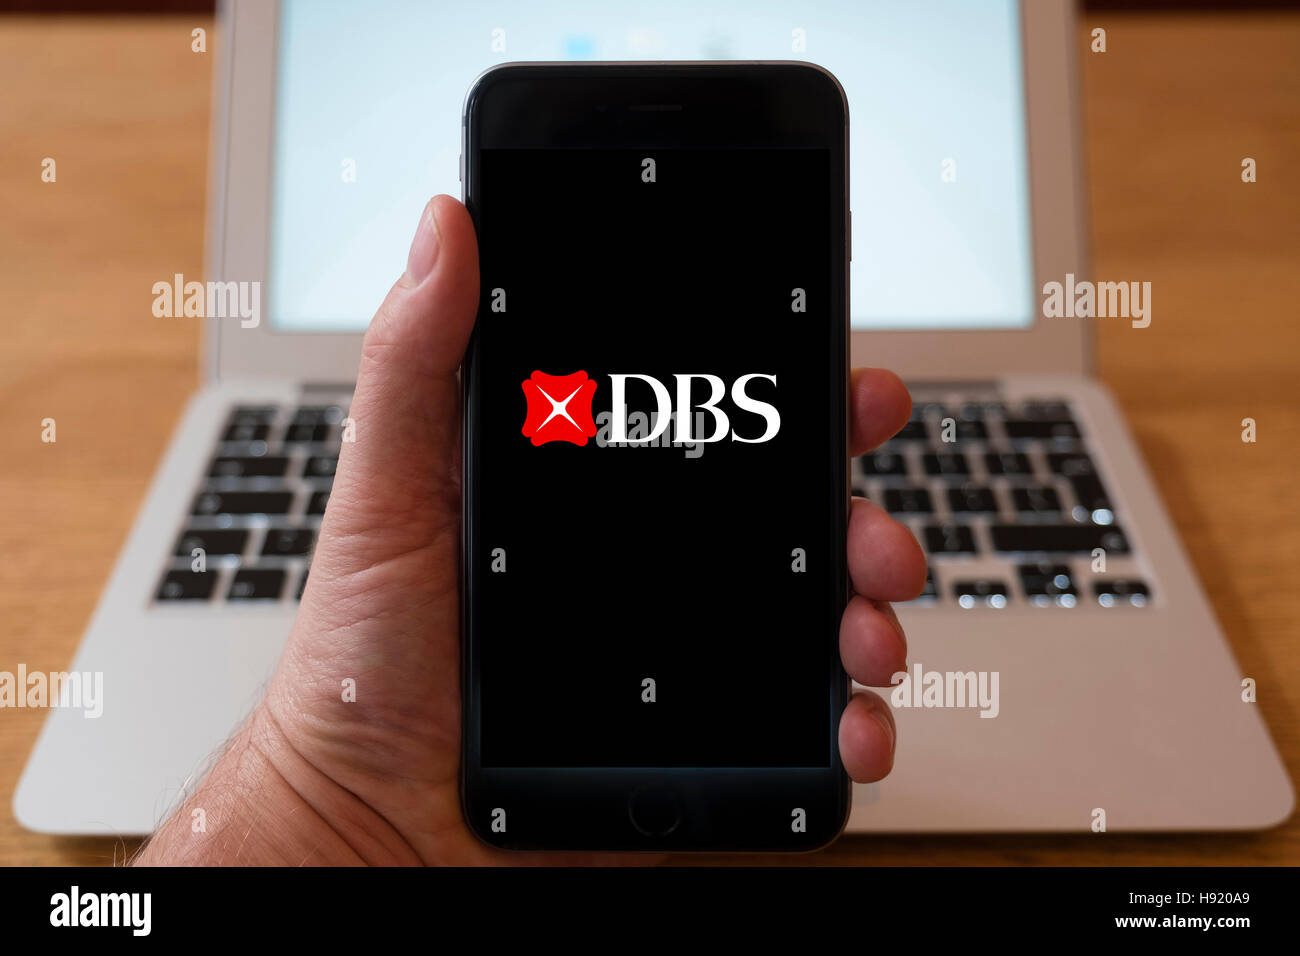 Using iPhone smart phone to display website logo of DBS, a Singaporean multinational banking and financial group Stock Photo